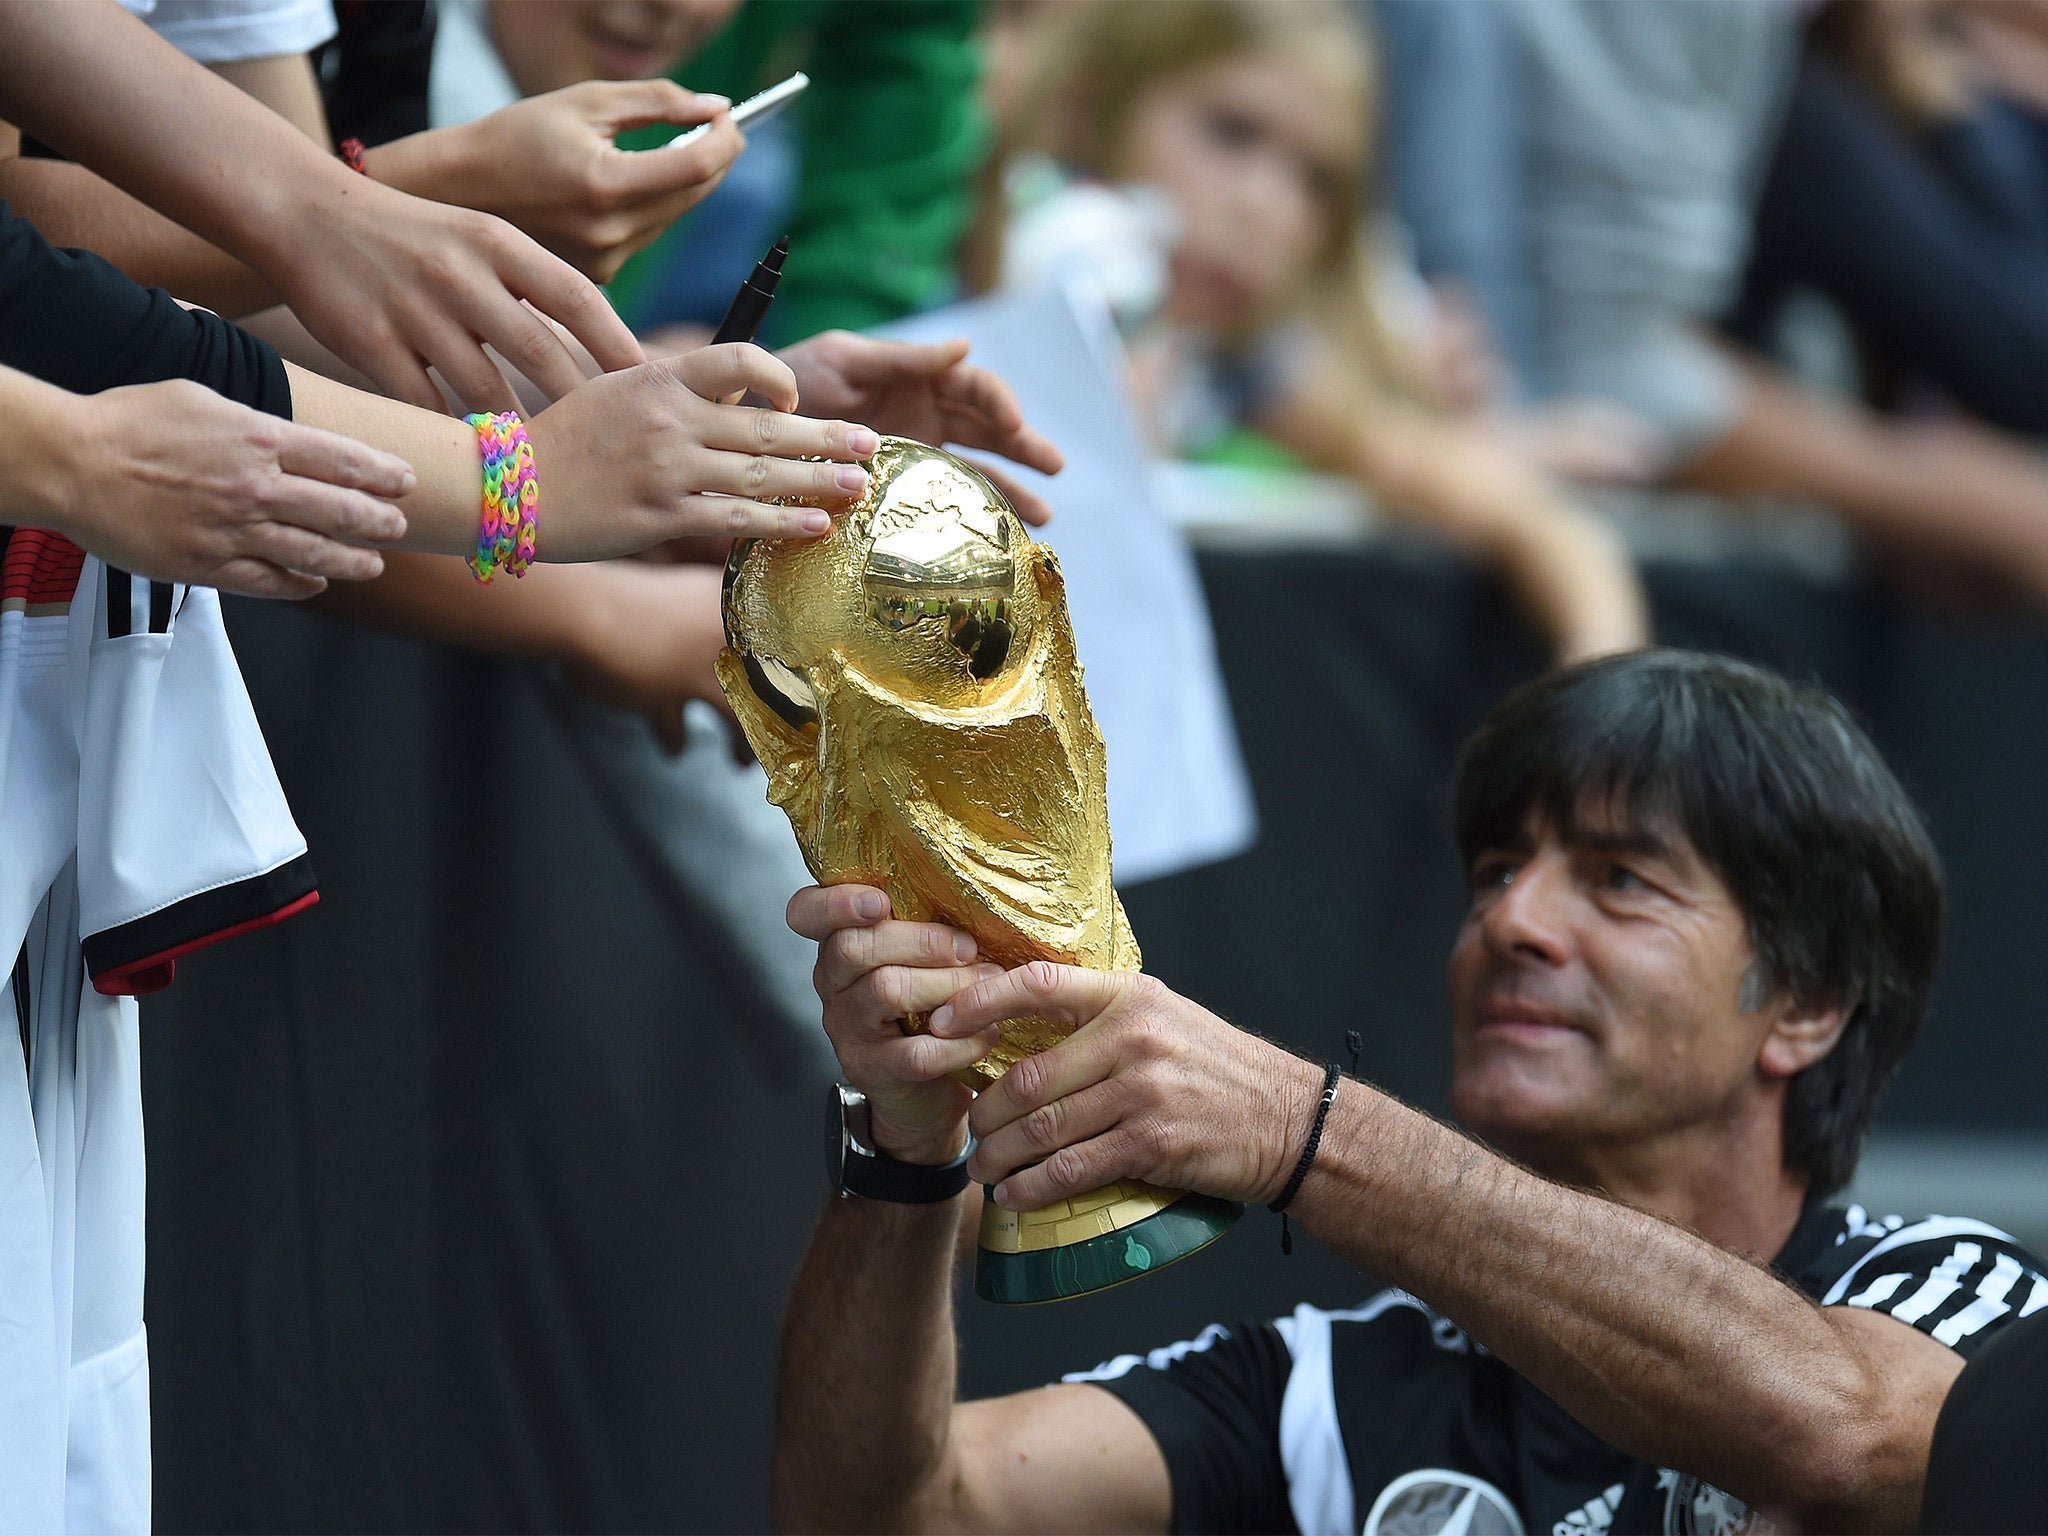 45,000 fans turned out for open training and a glimpse of the World Cup trophy, held by Germany coach Joachim Löw, ahead of his side’s sell-out friendly match against Argentina – a repeat of the final in Brazil this summer